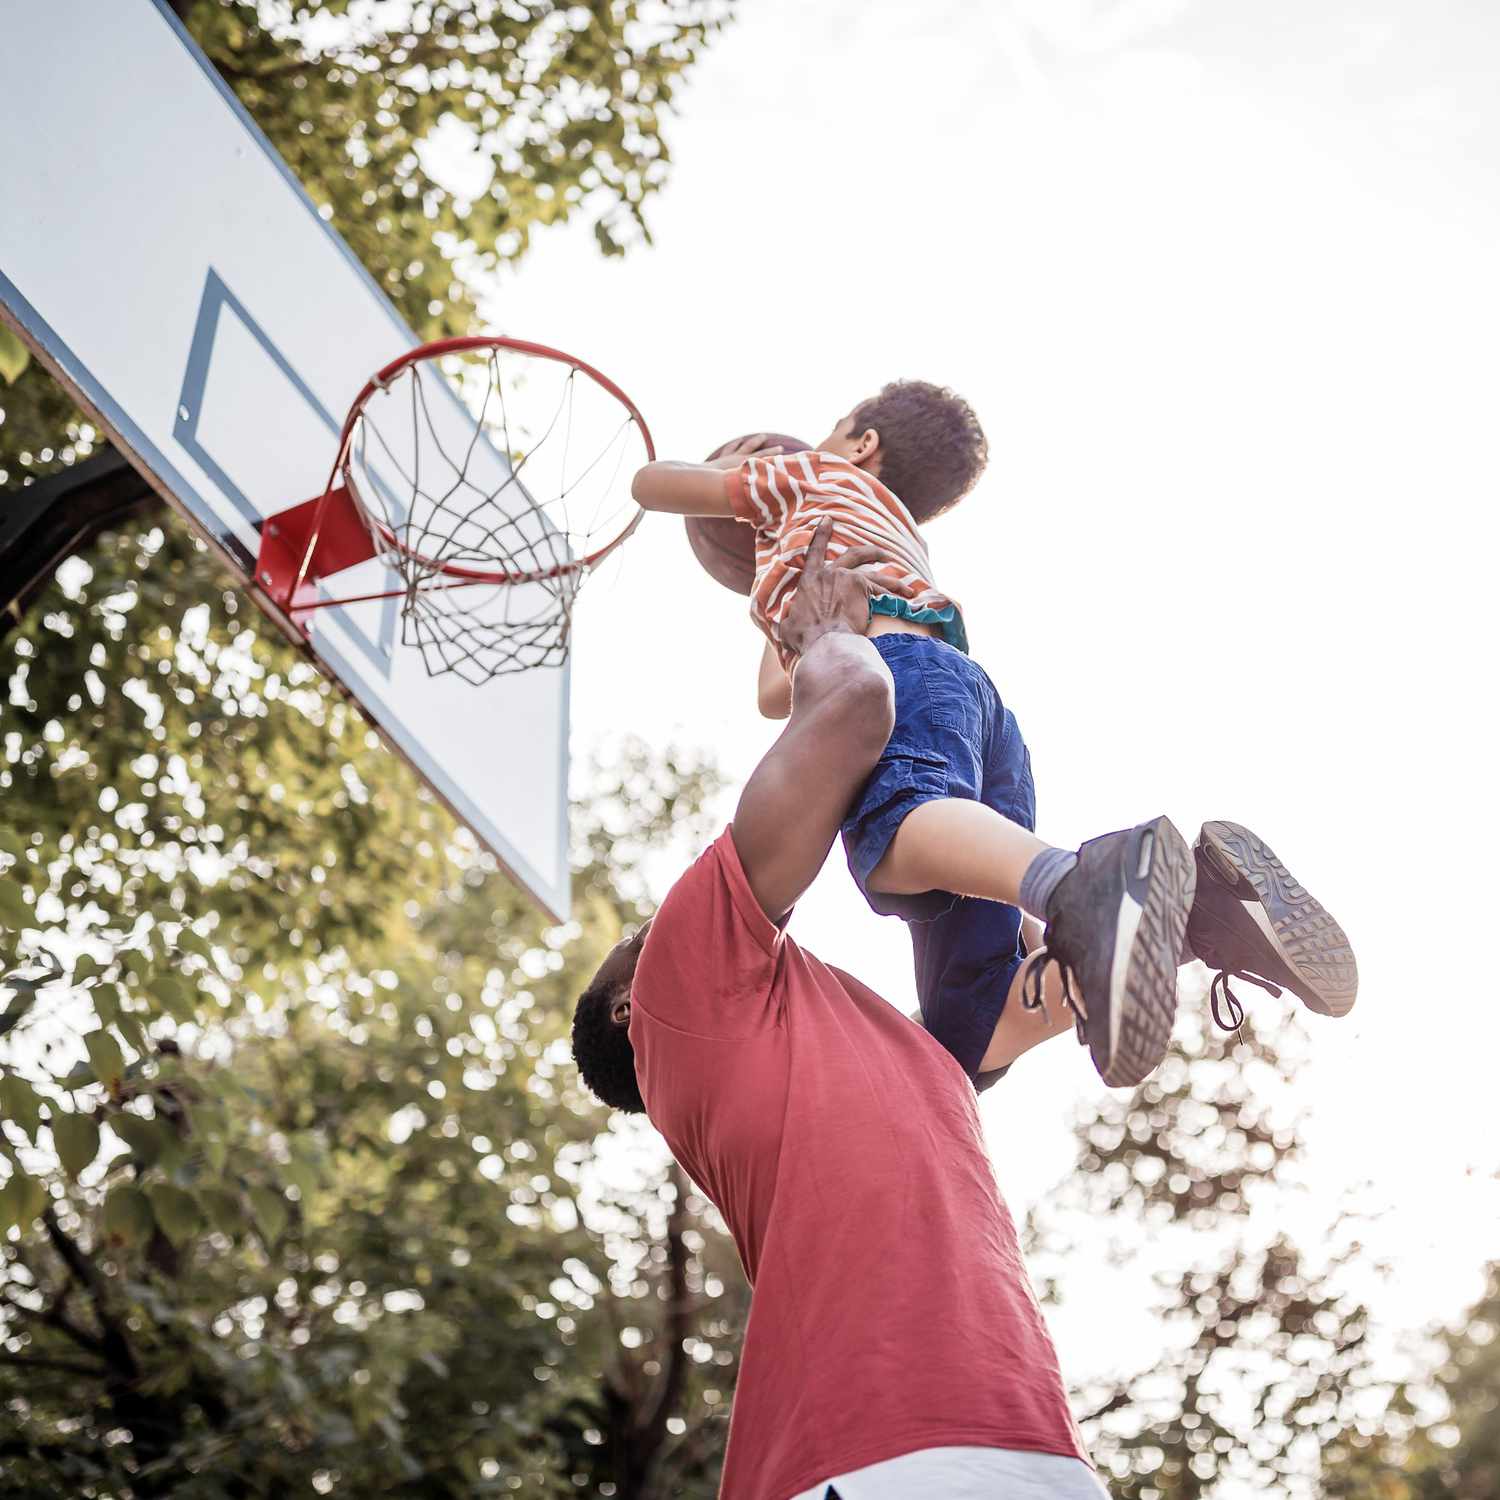 father lifting son so he can put basketball in basket